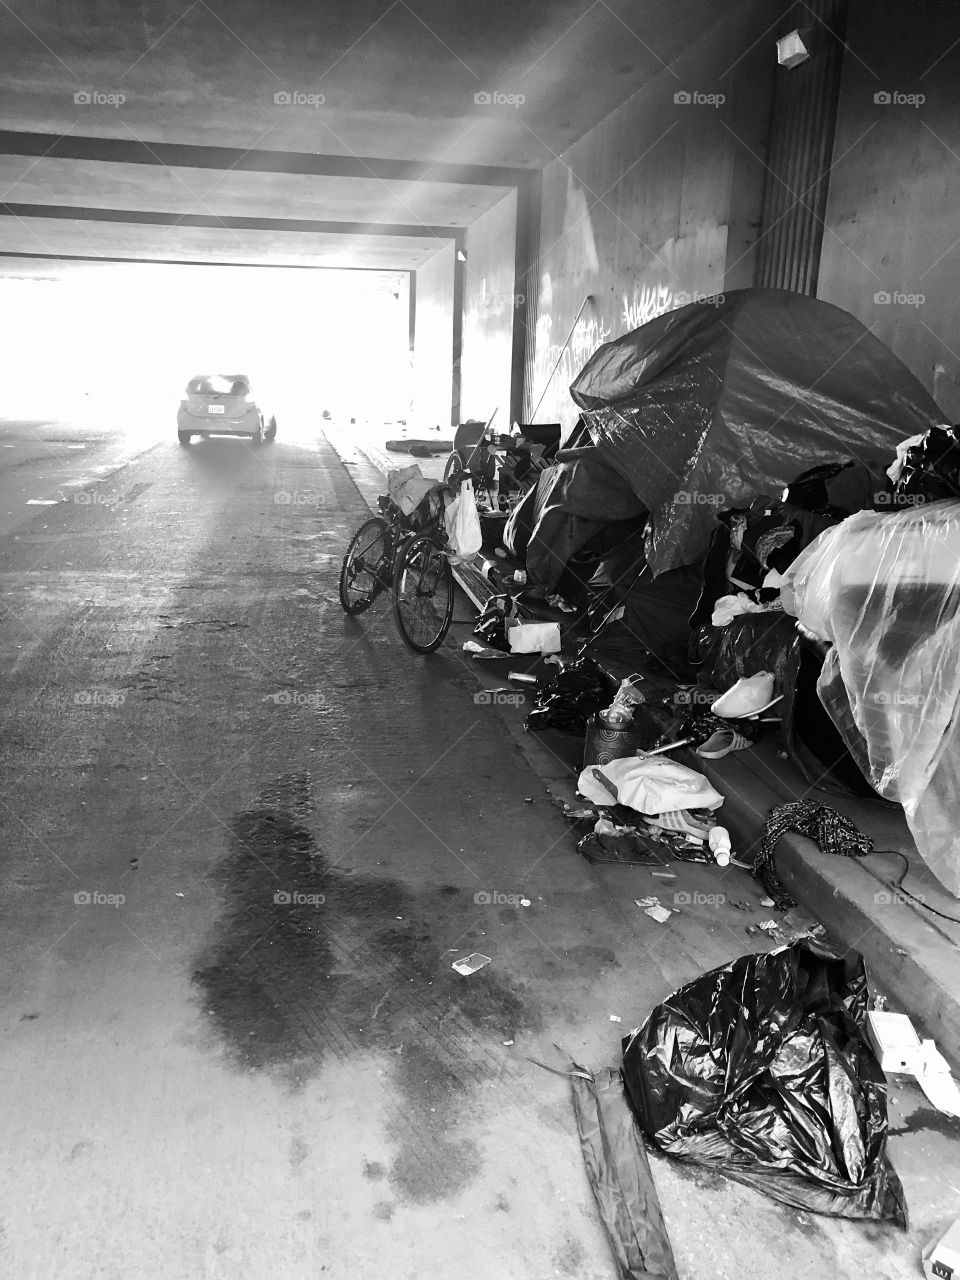 The final stages of the 30th street homeless camp before it’s inevitable destruction by caltrans trucks here in Oakland, California.